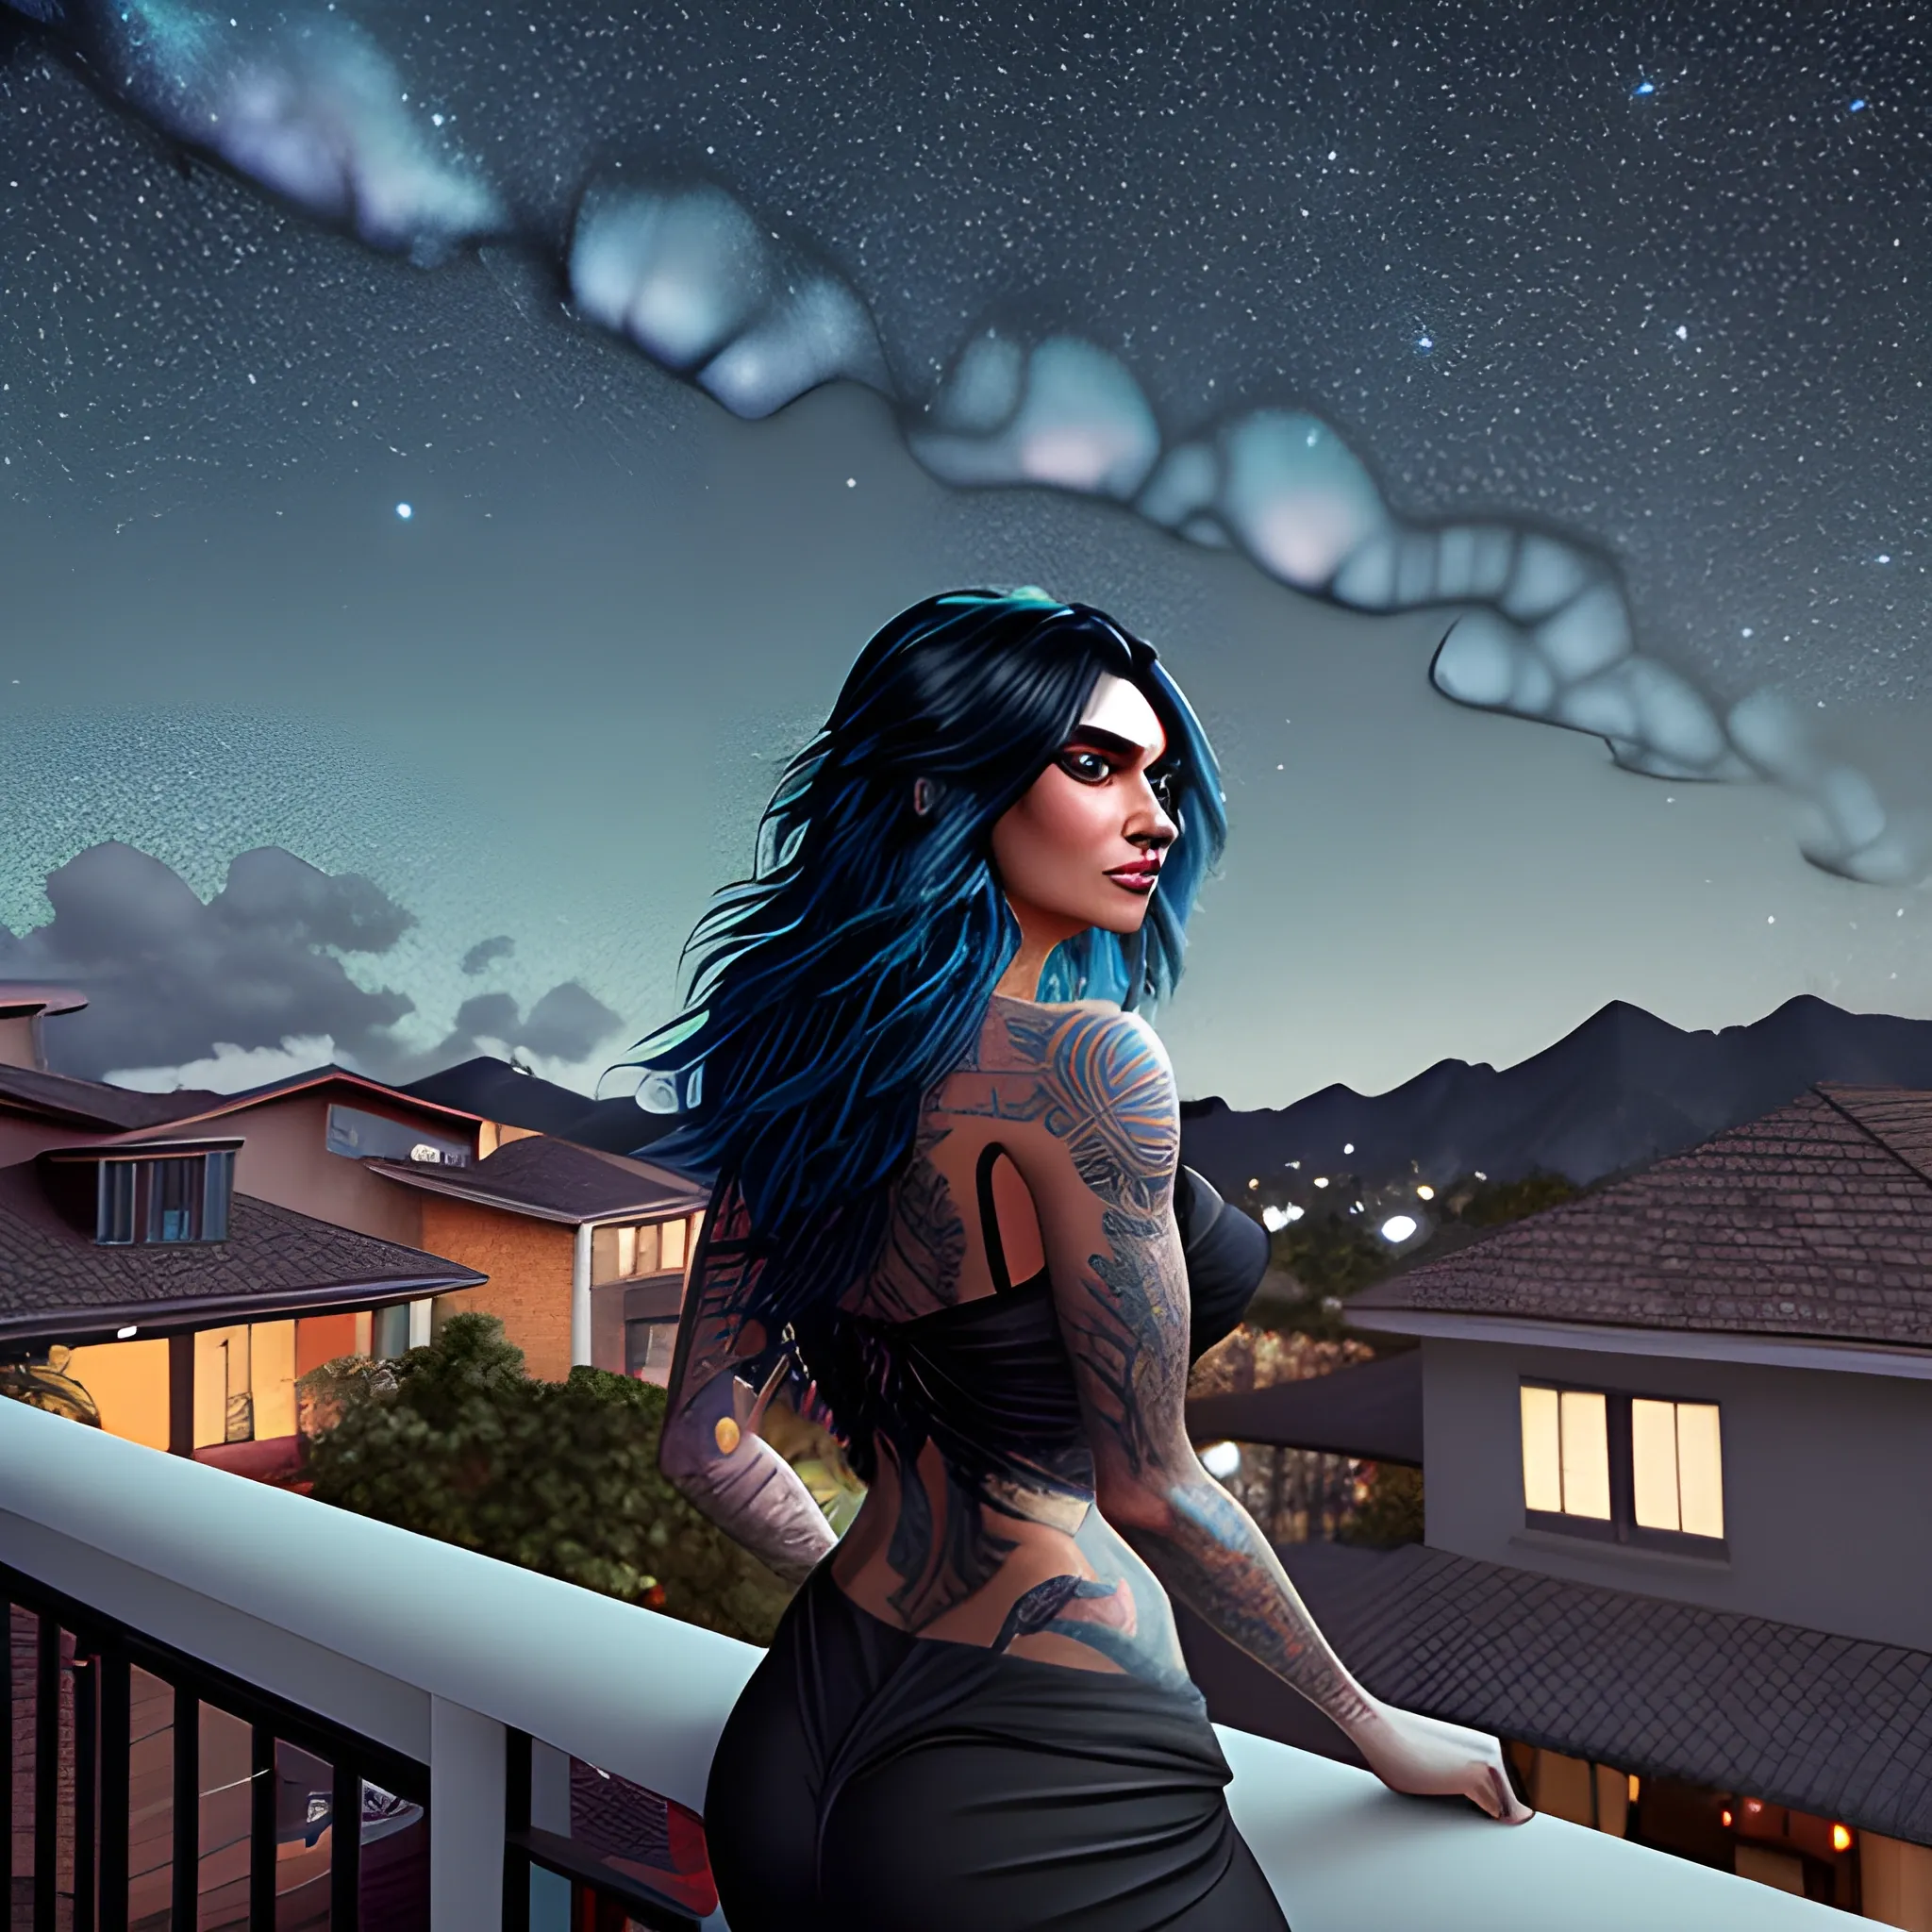 a brazilian girl with tone aquamarine and black hair, with tattoos, Sitting on a porch, overlooking the wall of house, wall dark grey, much dark starry sky, with few clouds, the woman looking at the sky, a shine in her hair, Trippy, Unreal Engine, Trippy